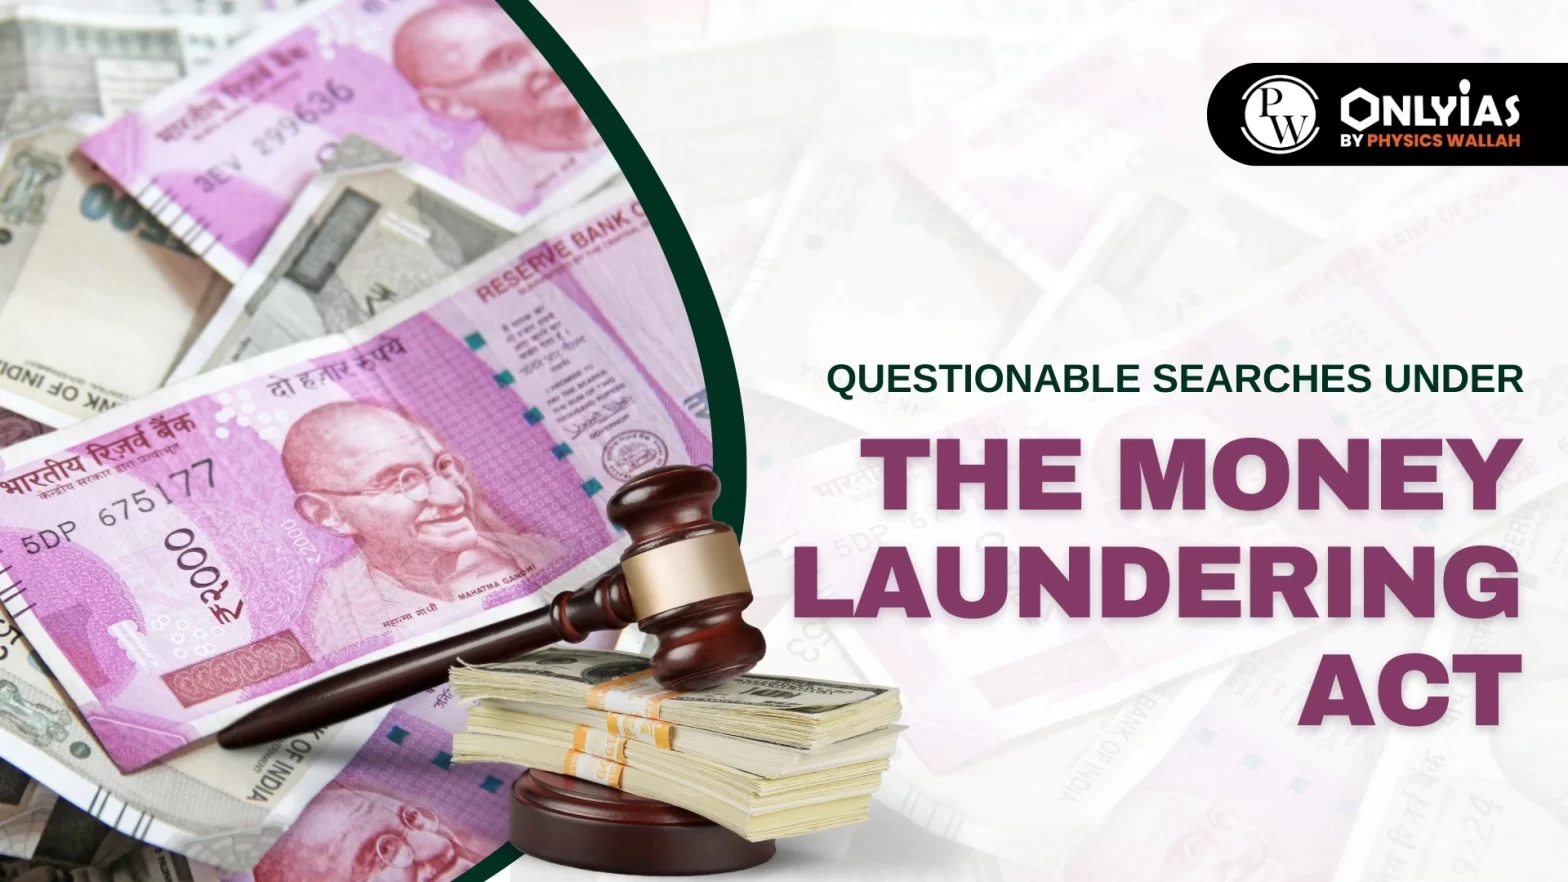 Questionable Searches Under The Money Laundering Act